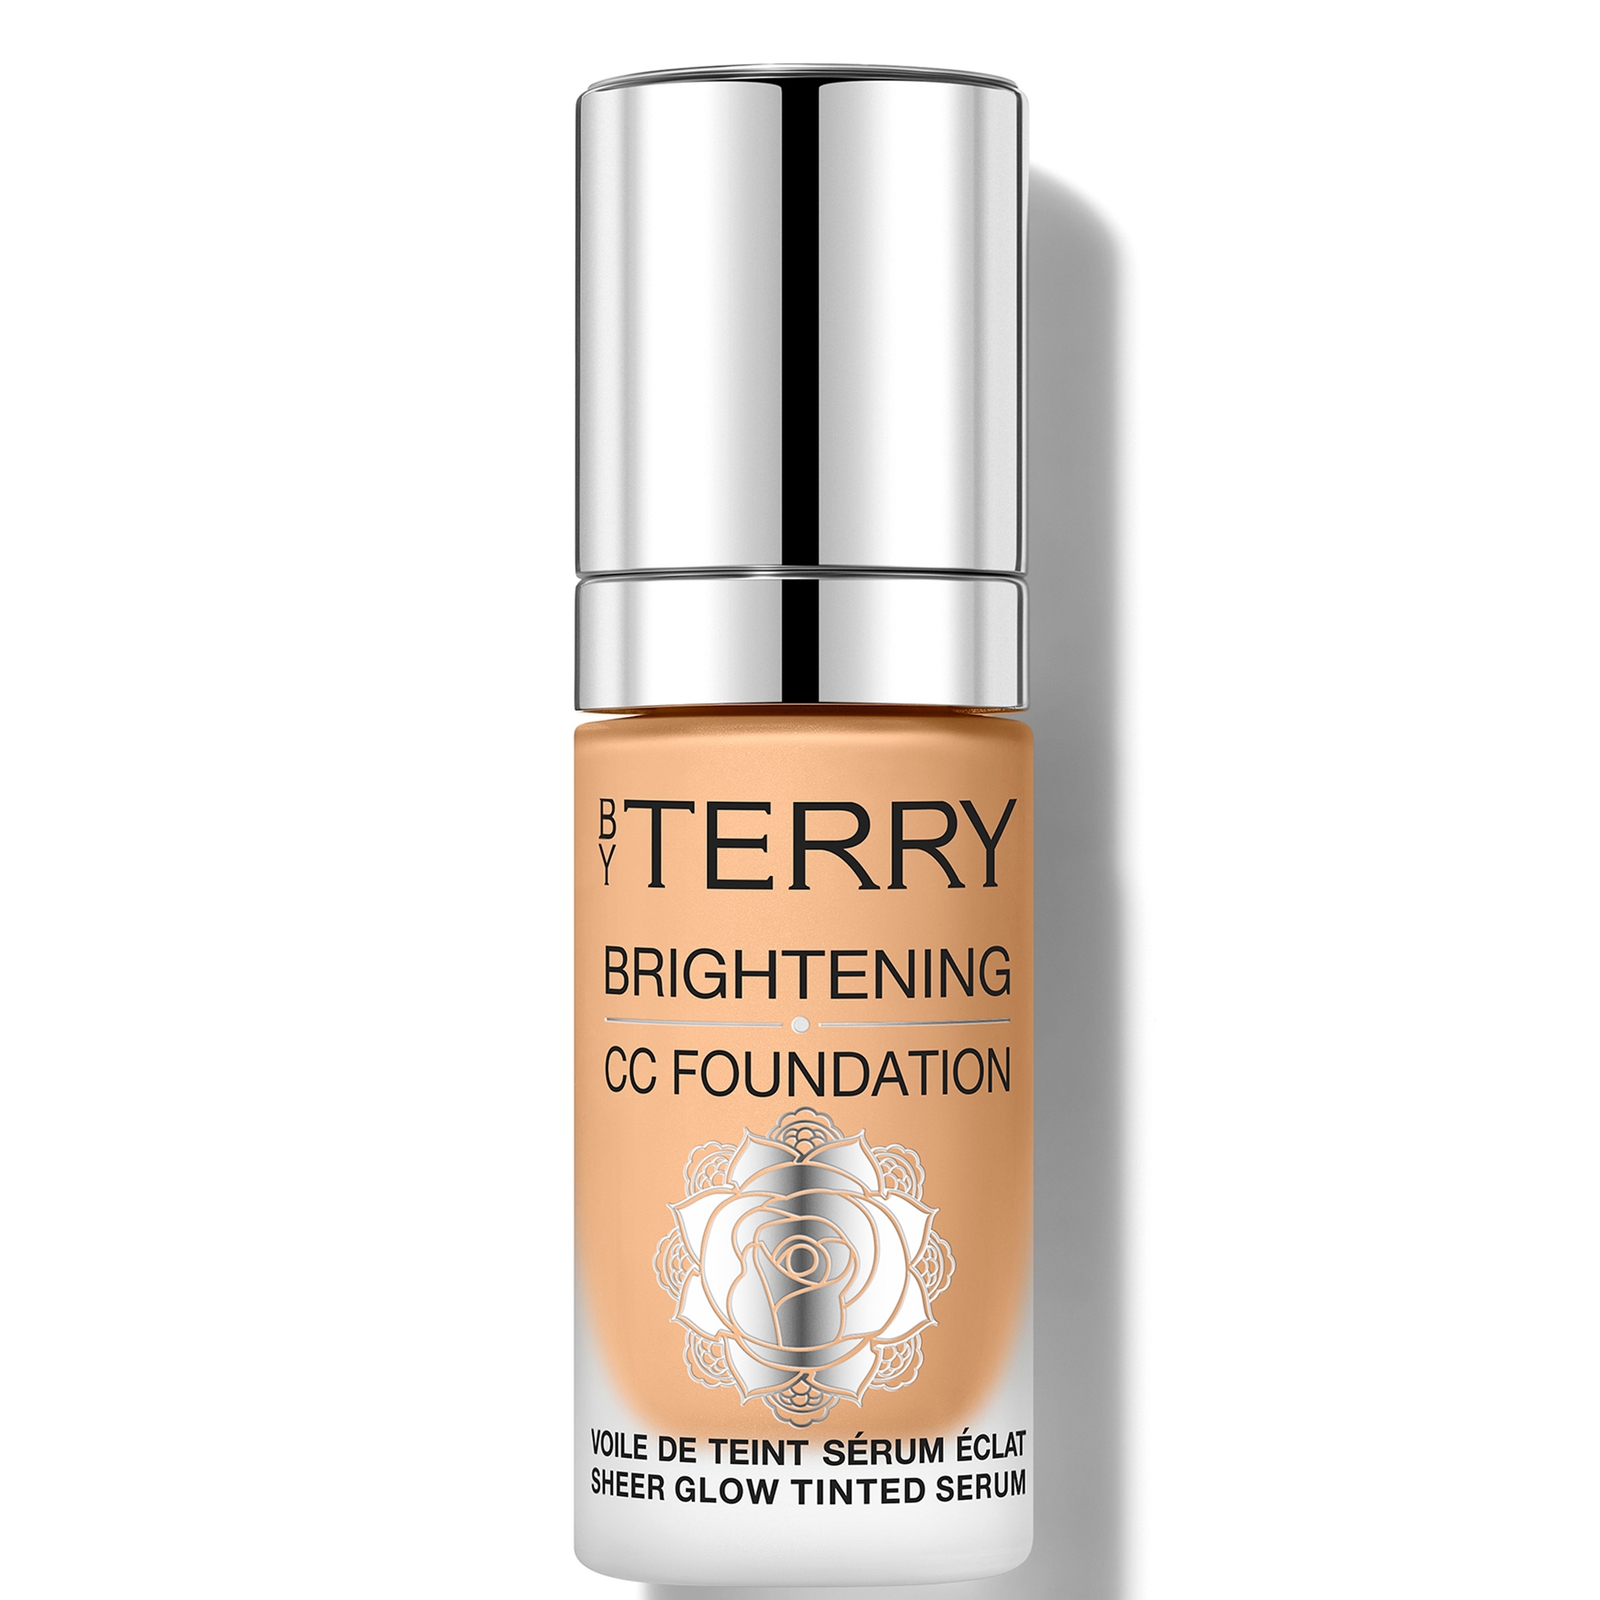 Image of By Terry Brightening CC Foundation 30ml (Various Shades) - 5C - MEDIUM TAN COOL